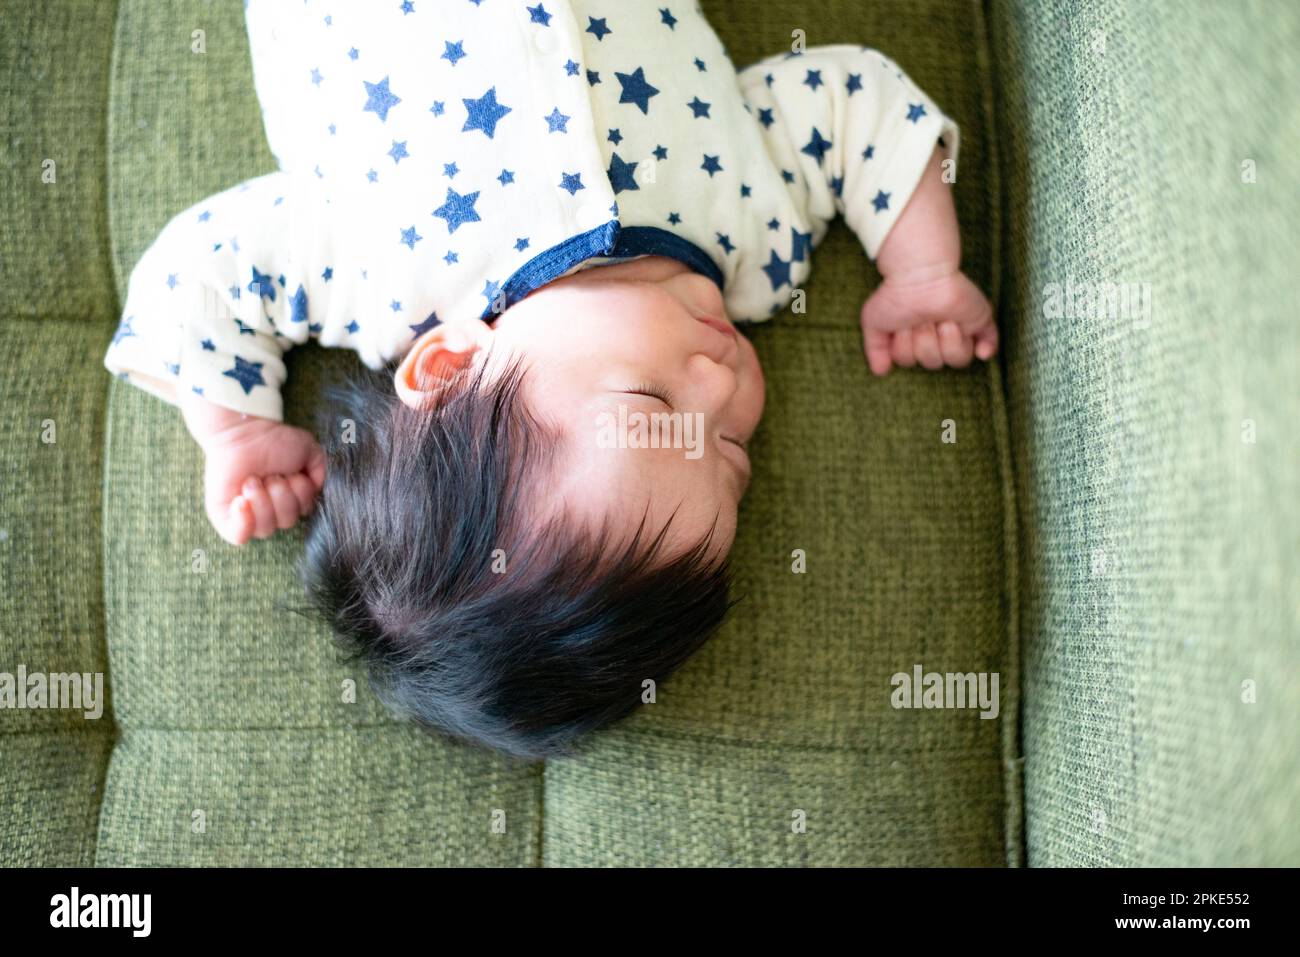 Baby sleeping on couch Stock Photo